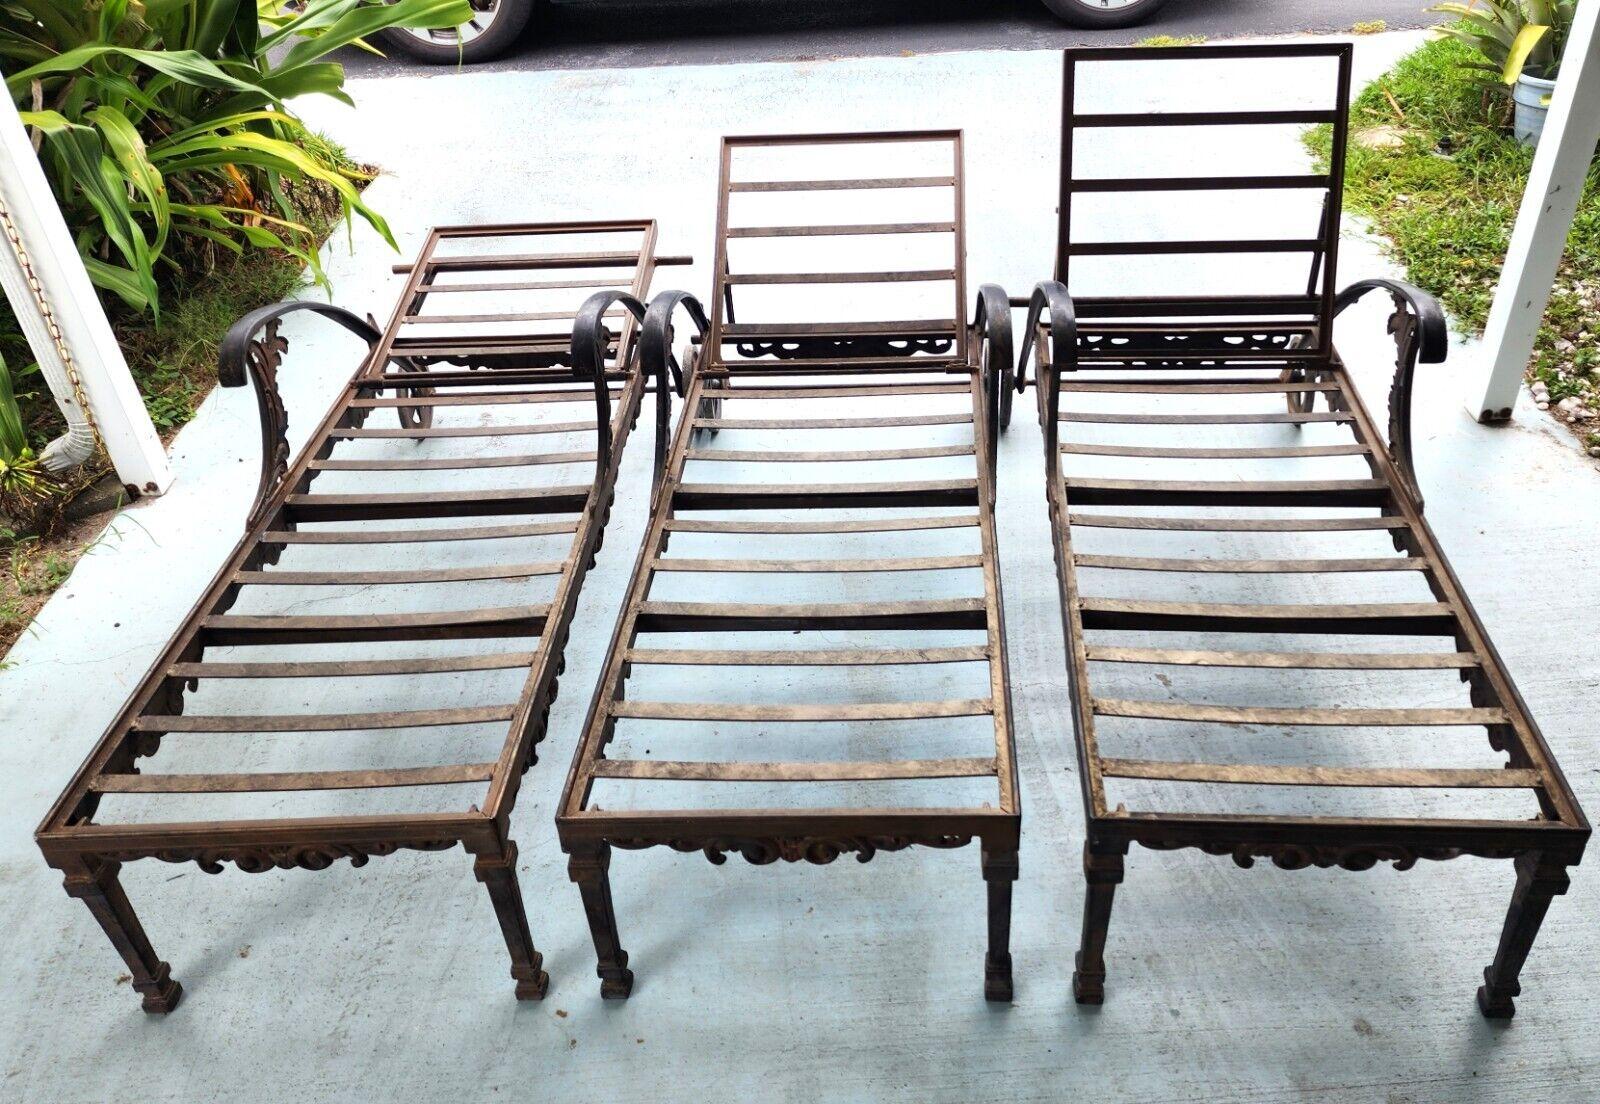 Vintage Chaise Lounges Outdoor Ornate Rustproof For Sale 1